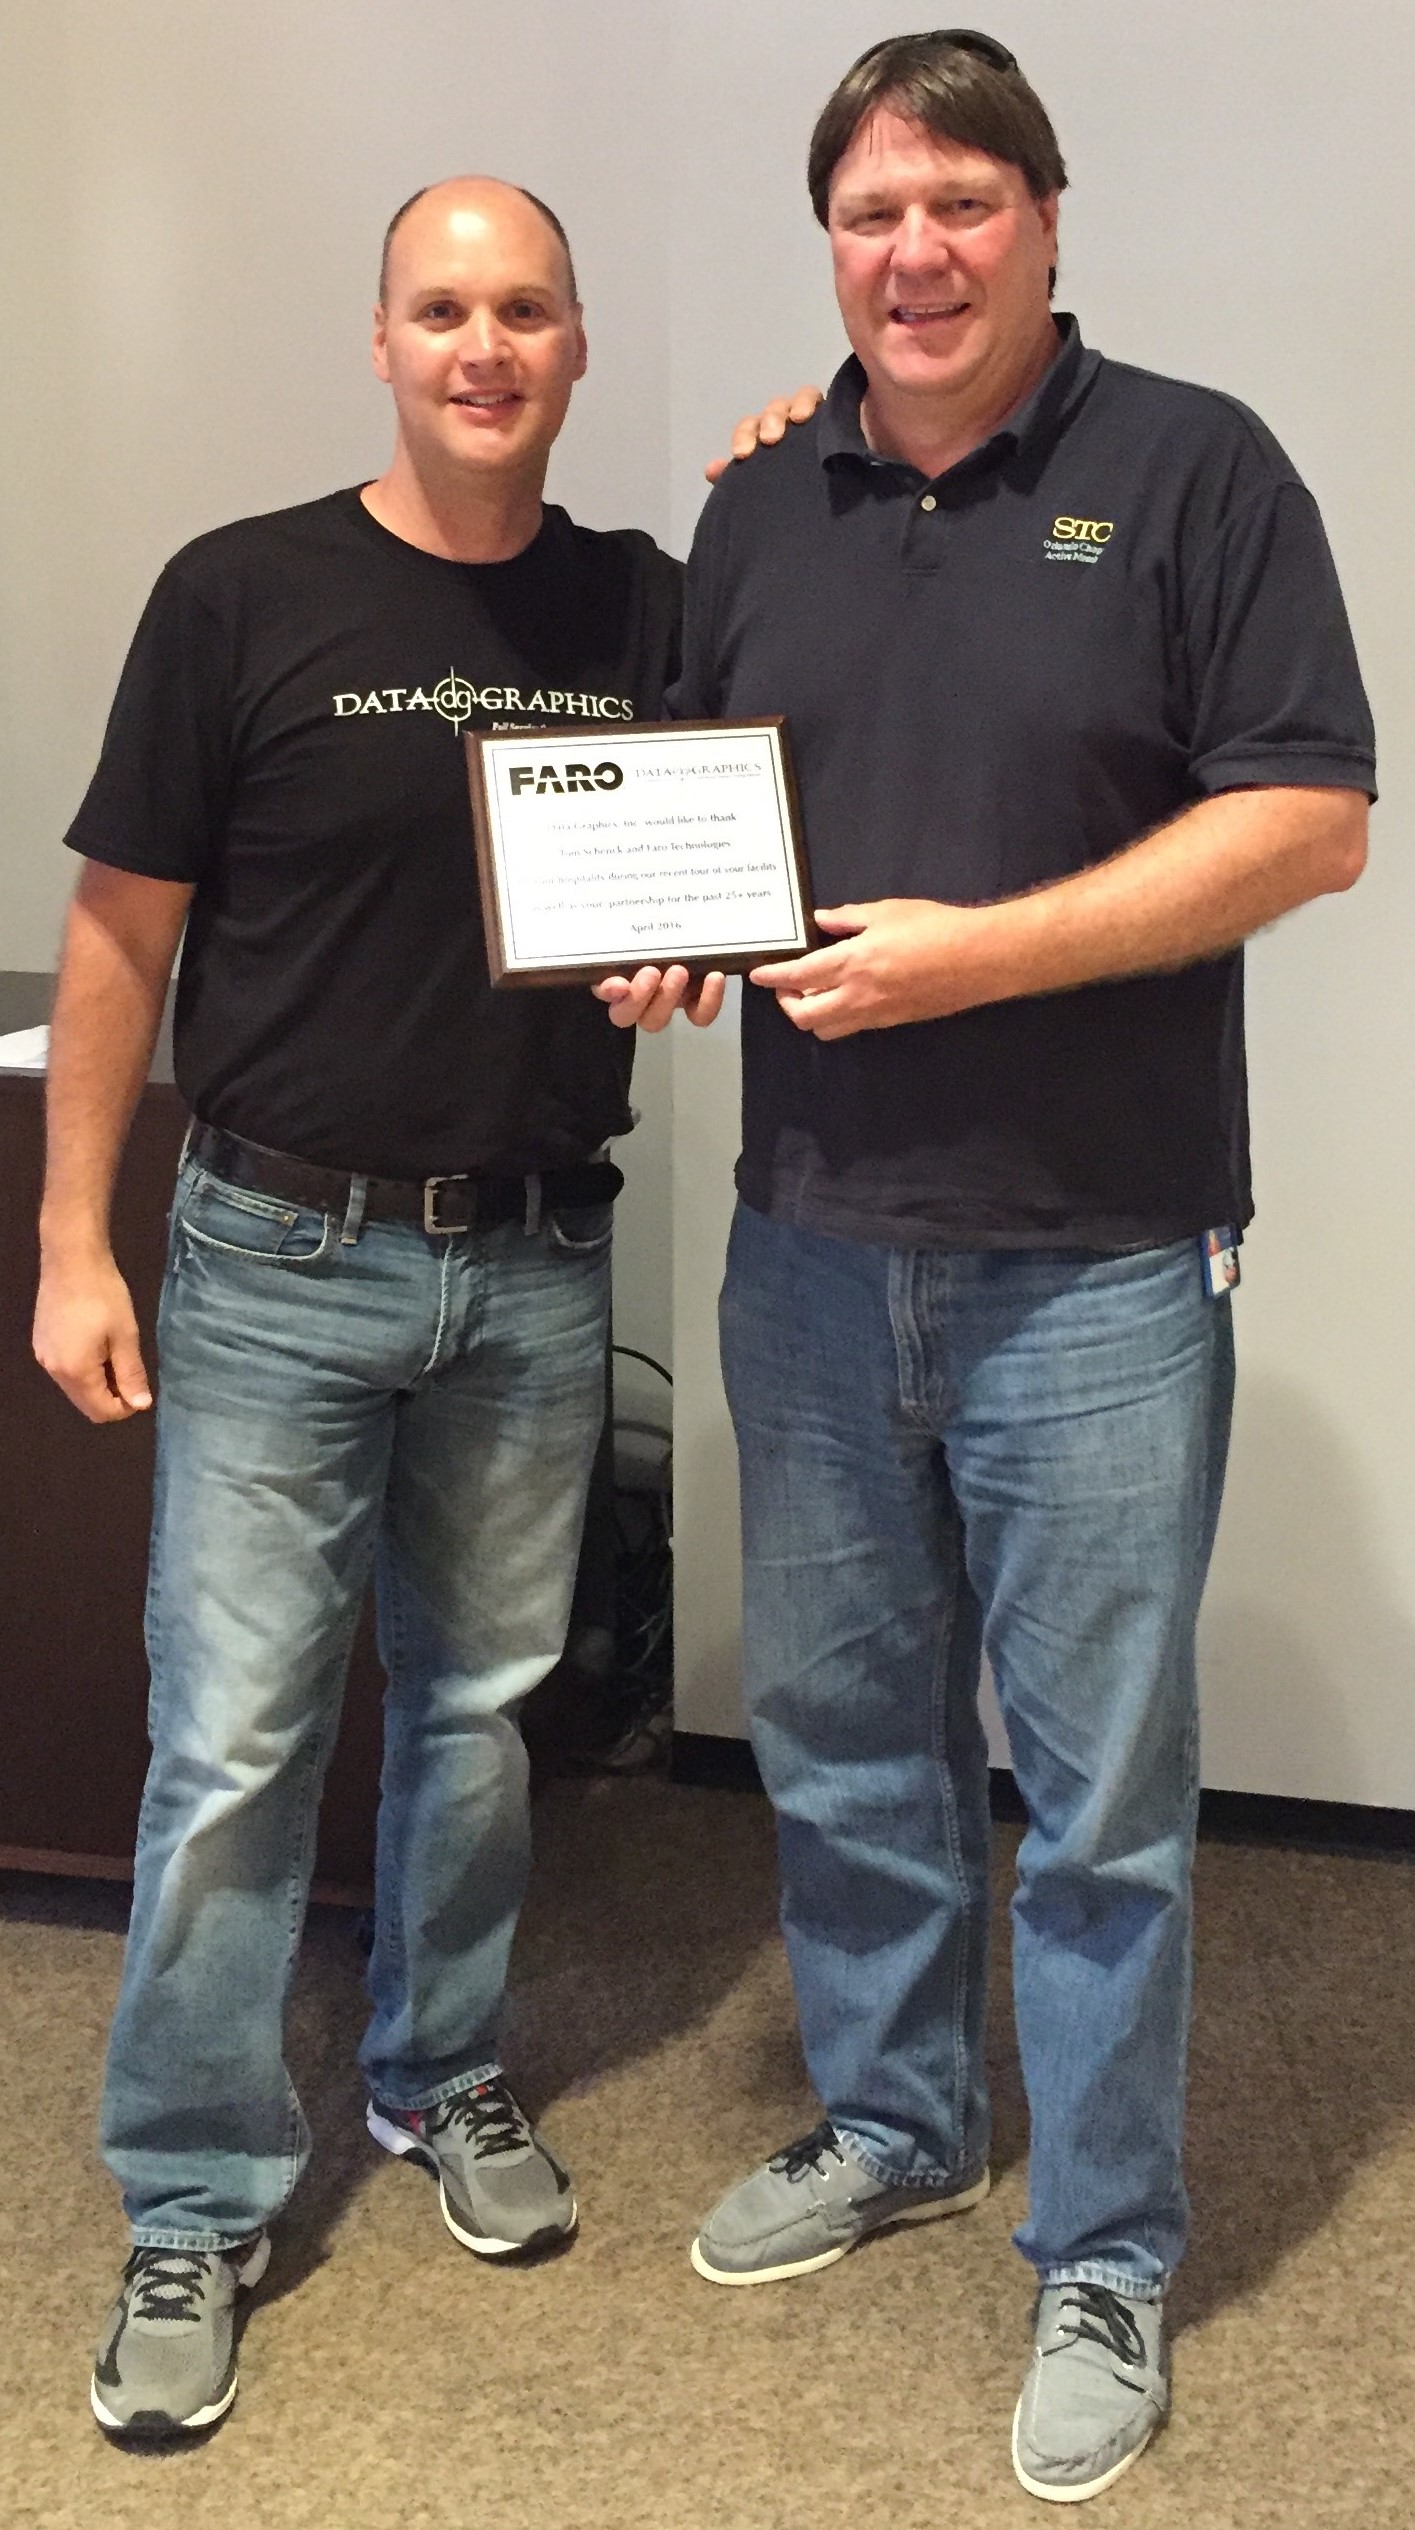 CEO Brad Presenting a plaque honoring our host with the most, Tom. Thanks again for everything, Tom and the Faro Team.